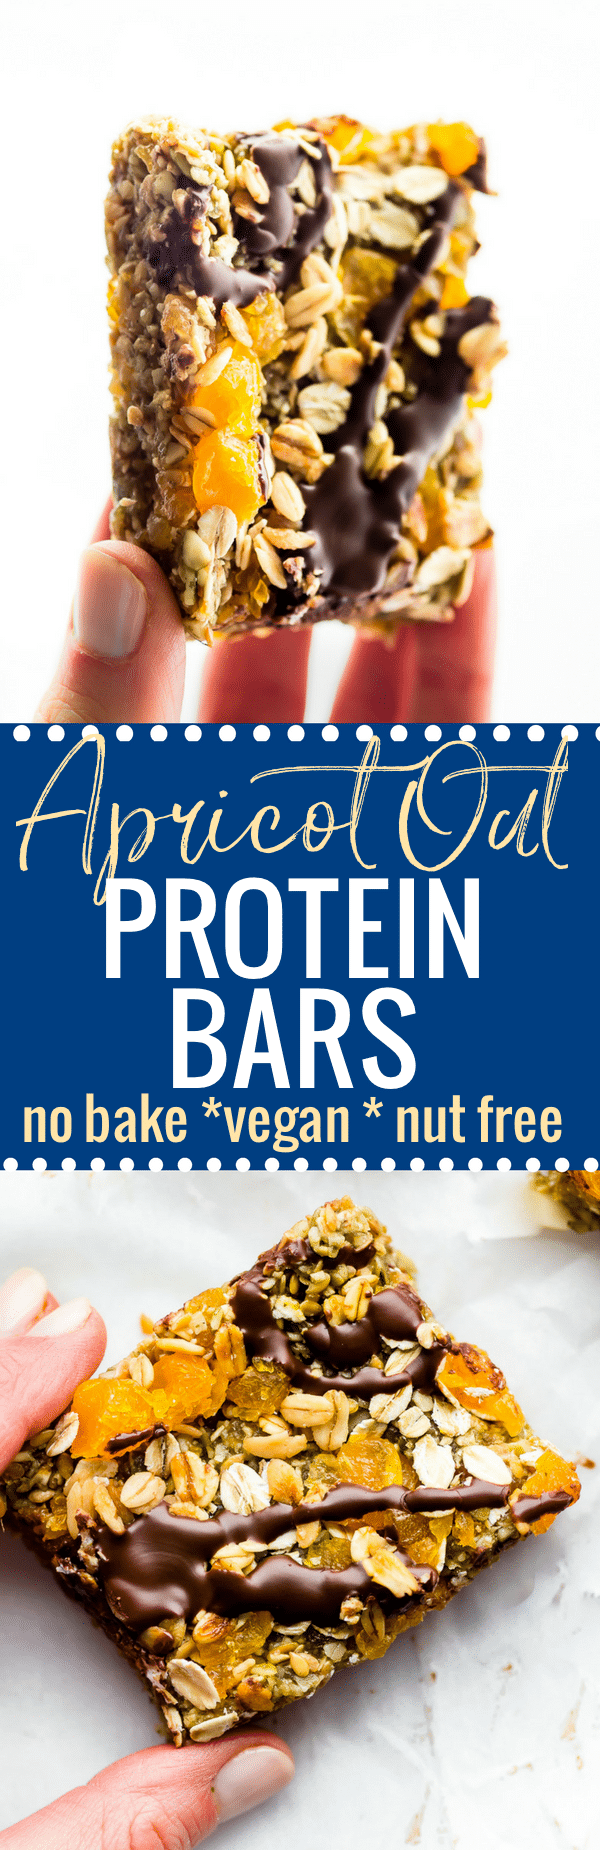 These No Bake Apricot Oat Protein Bars are easy to make with turkish apricots, gluten free oats, protein, and seeds! The perfect nutritious protein packed snack or breakfast to go! Sweet, salty, chewy, and dense! A Wholesome homemade protein bar recipes that's nut free, vegan, and naturally sweetened! www.cottercrunch.com